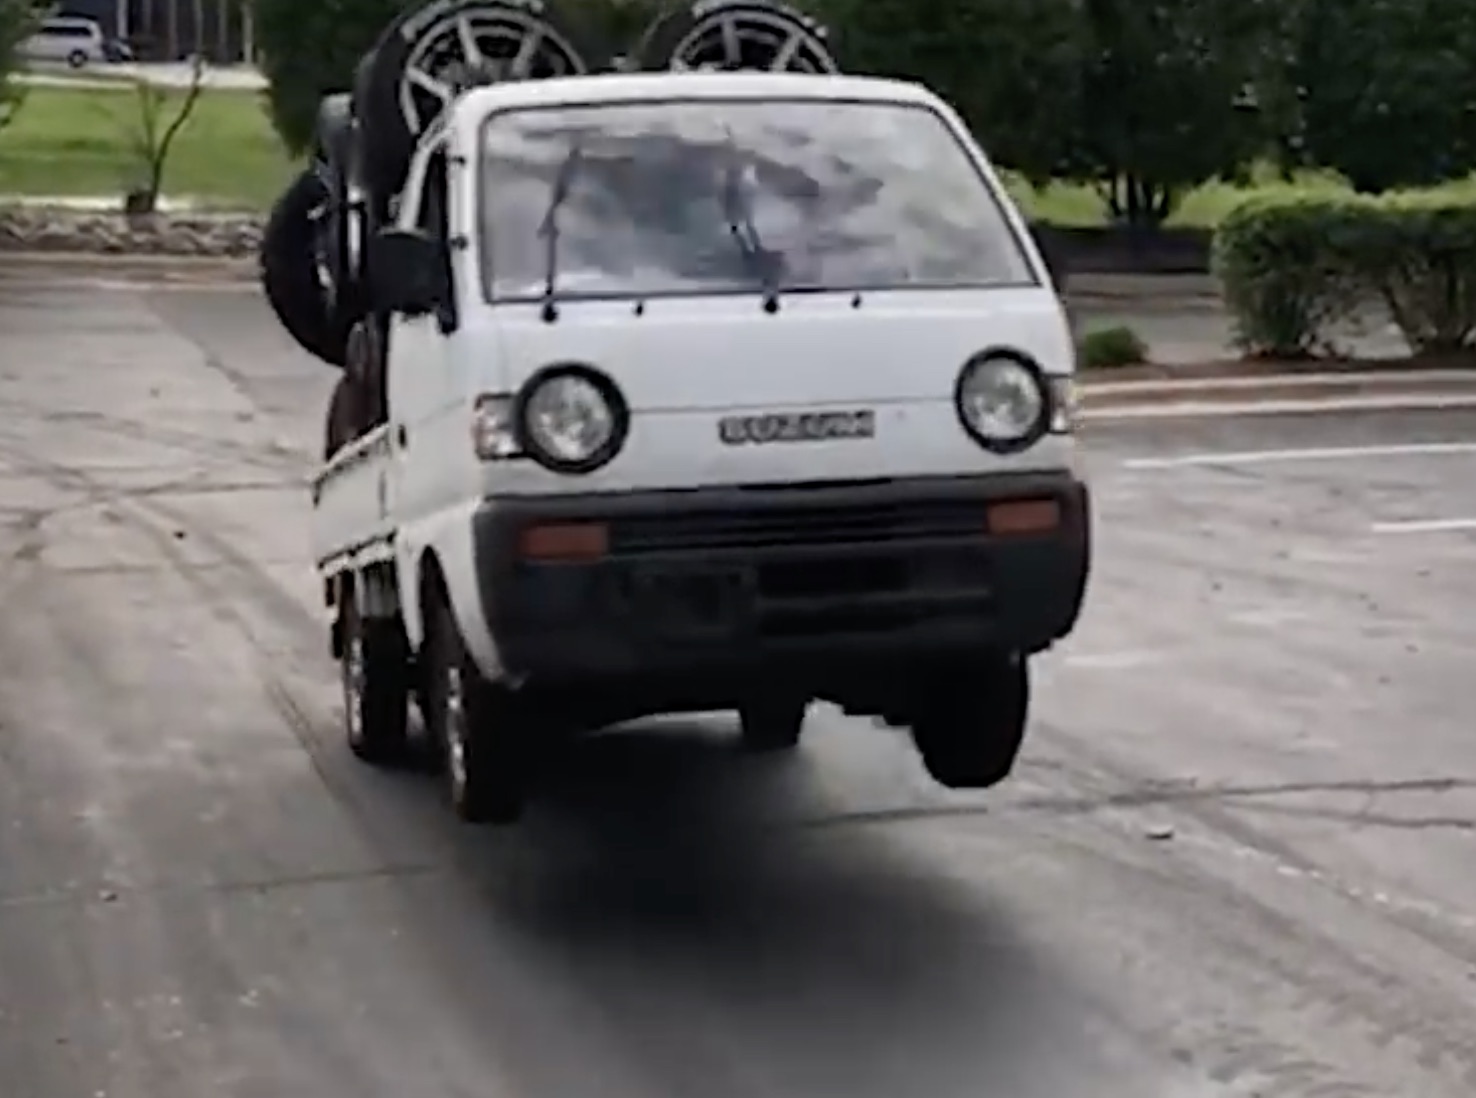 Hoonigan Is Building A Pit Truck Out Of This Suzuki Carry For A World Class Drift Team!